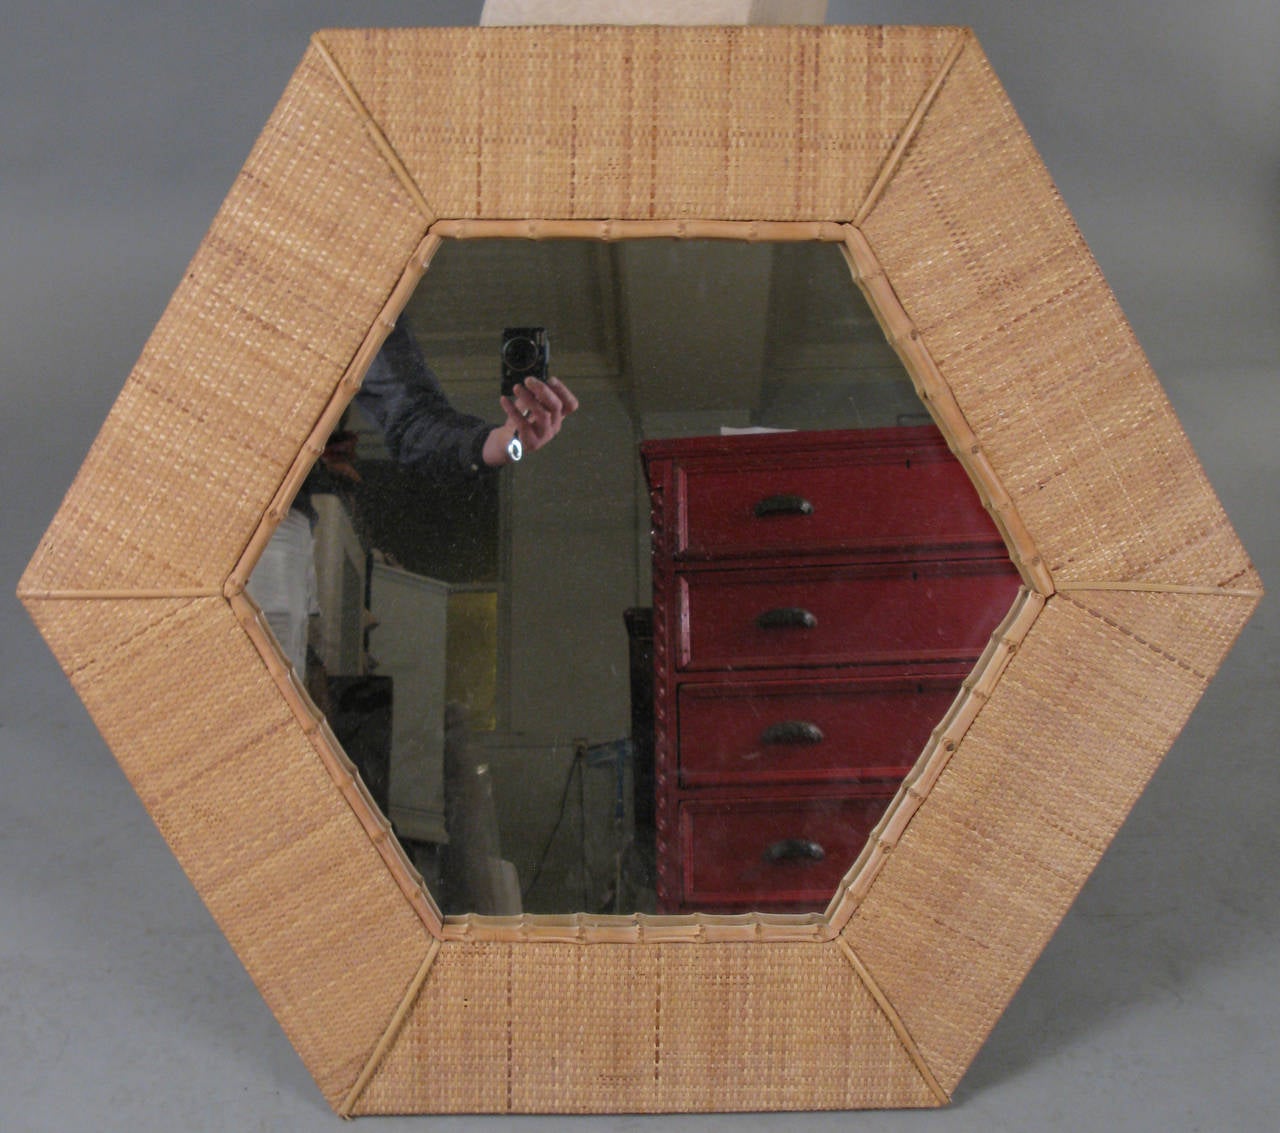 A very unique 1960s modern octagon-shaped mirror, with a wide border covered in woven rattan, with a bamboo border, made by Raymor.